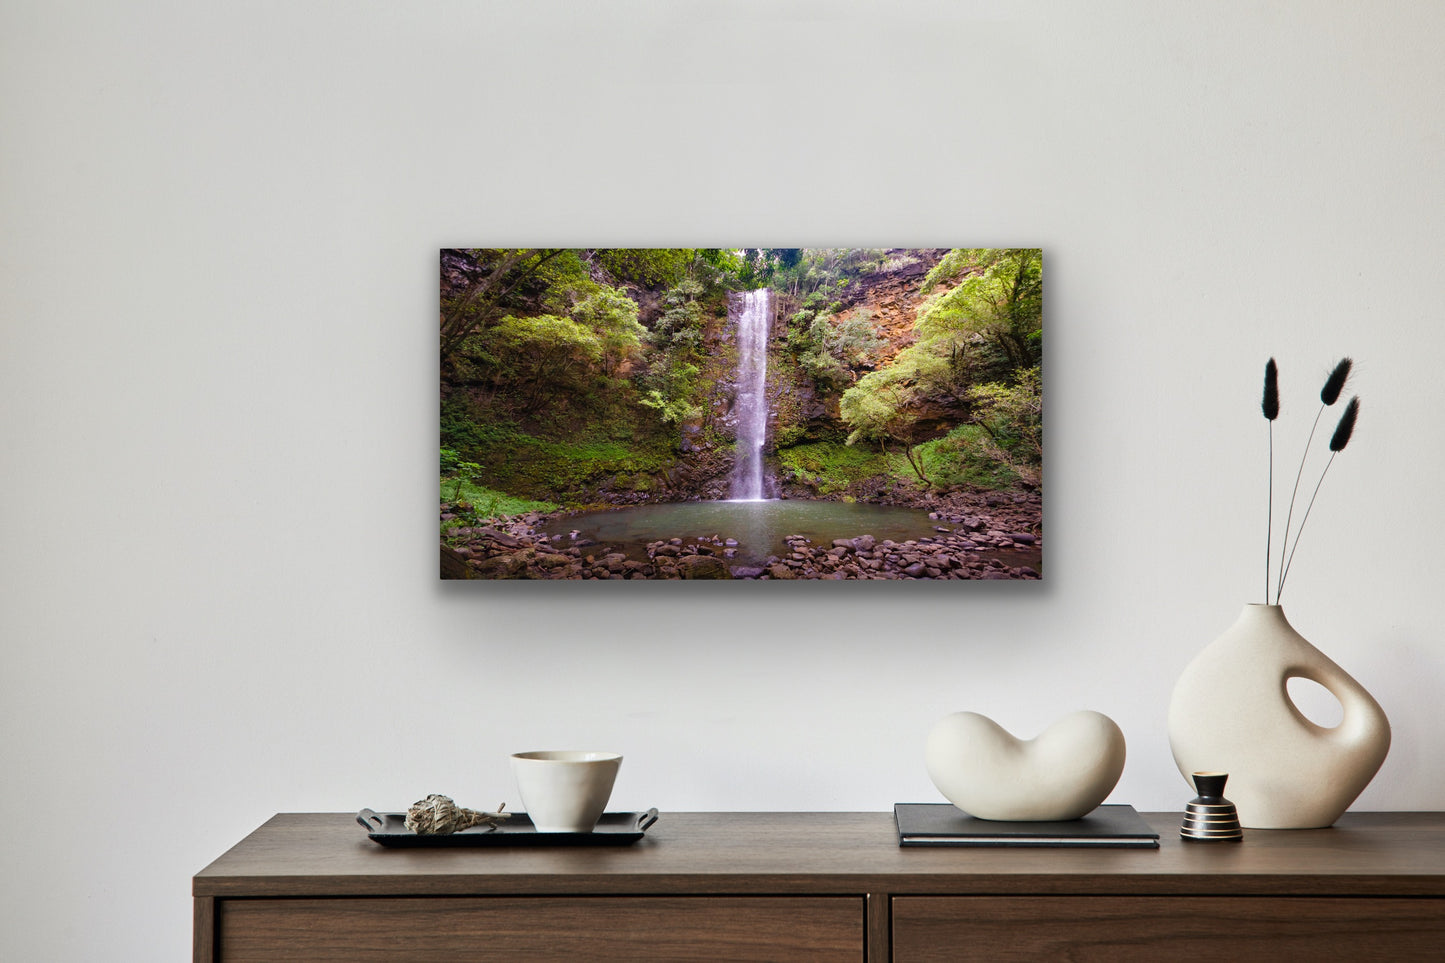 Wall demo of Secret Falls, a scenic fine art photograph by Kauai outdoor and landscape photographers Inspiring Images Hawaii.